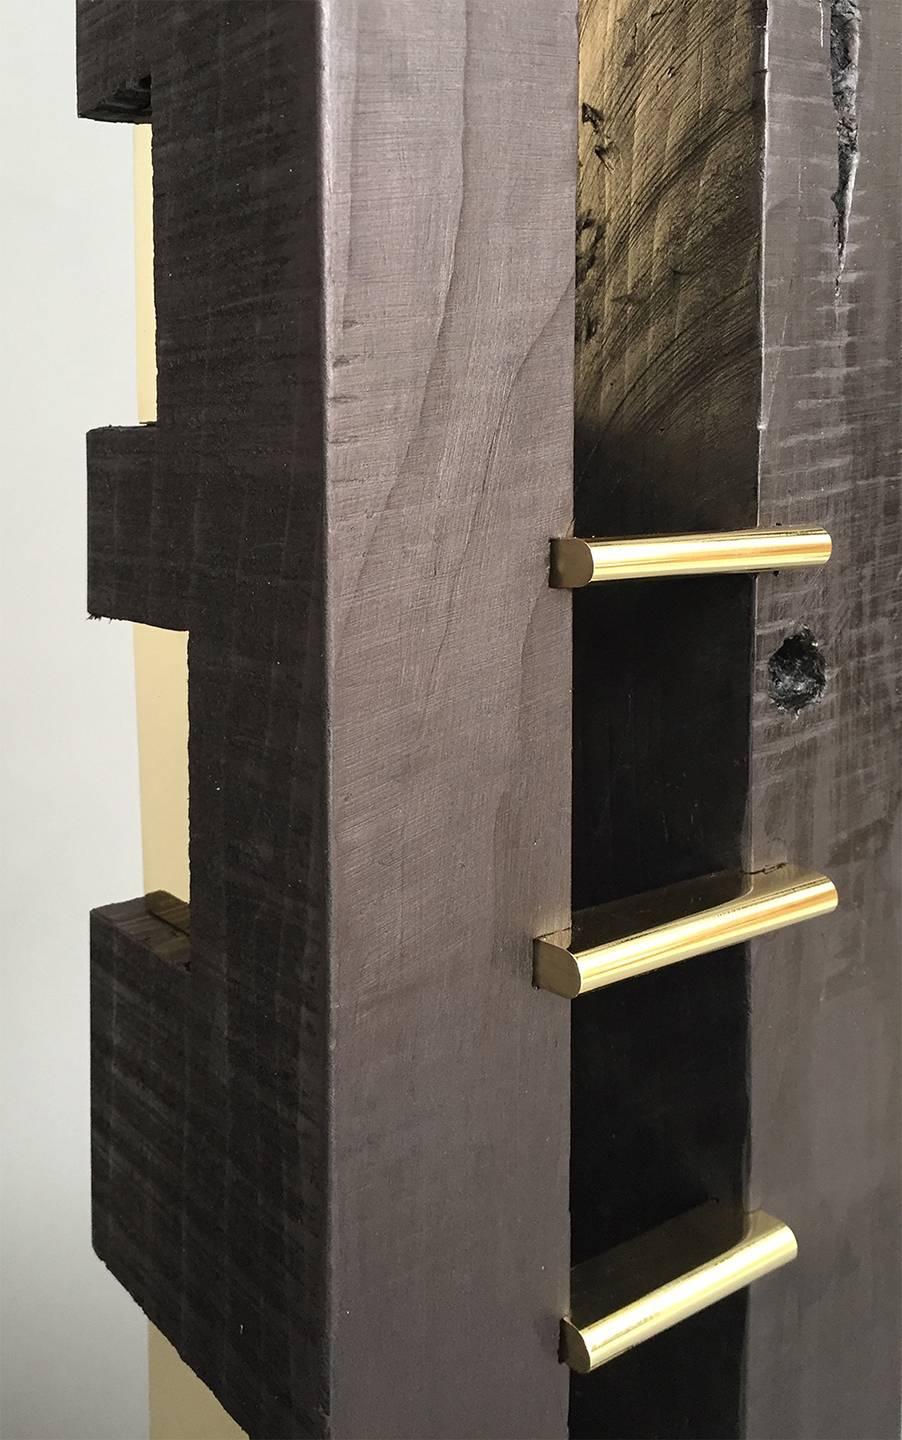 '24-karat black' is a totem of seduction, critique and reflection. Offering guidance through the difficult passage of time - dug out grooves represent trenches, uneven polished brass steps cunningly promise Jacob’s ladder, and the wood beam looks